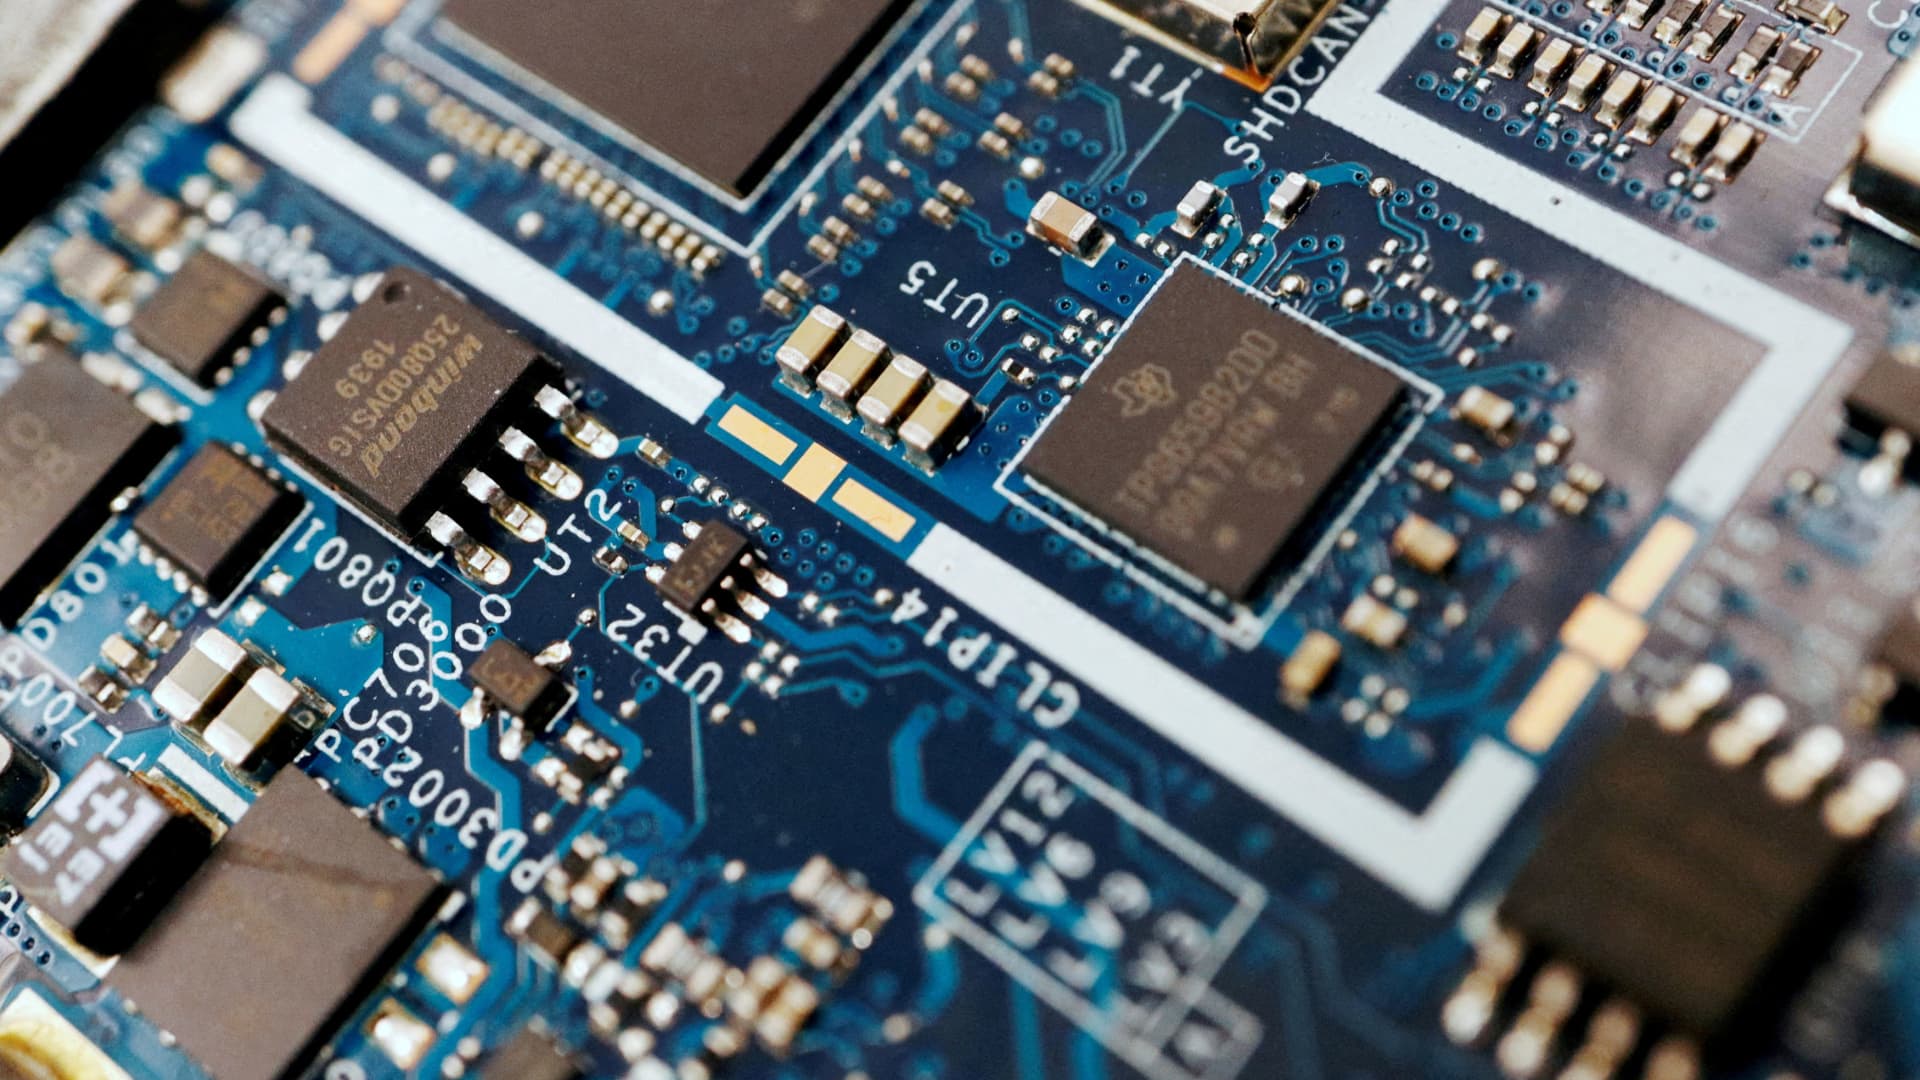 Samsung and ASML to invest $760 million to build an advanced chip plant in South Korea